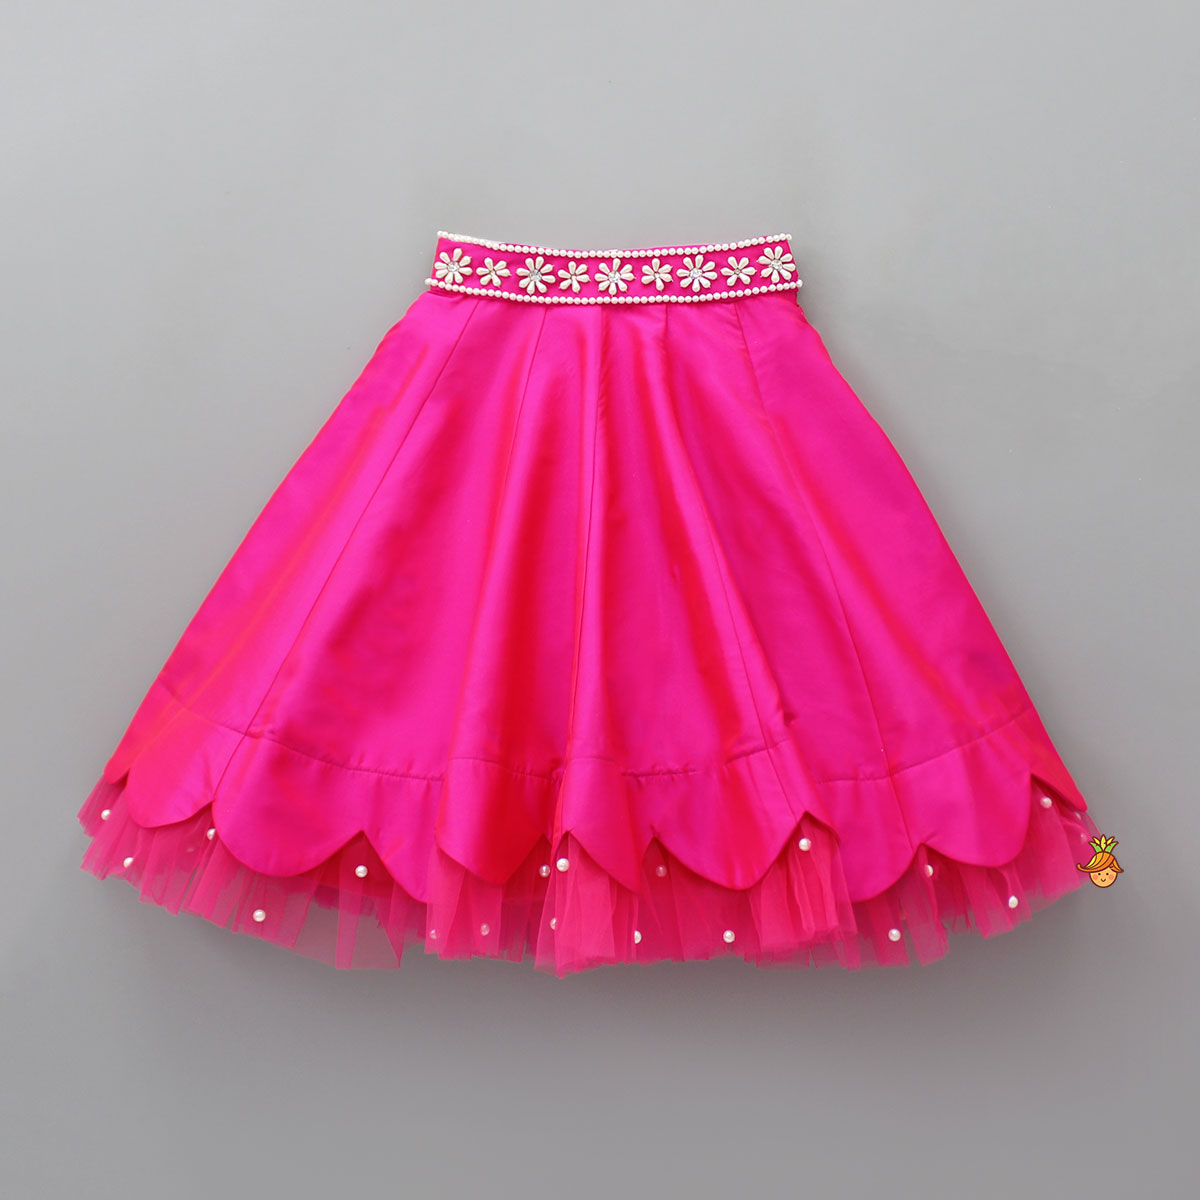 Halter Neck Pink Floral Embroidered Top And Scalloped Hem Lehenga With Flat Back Pearls Enhanced Ruffle Dupatta